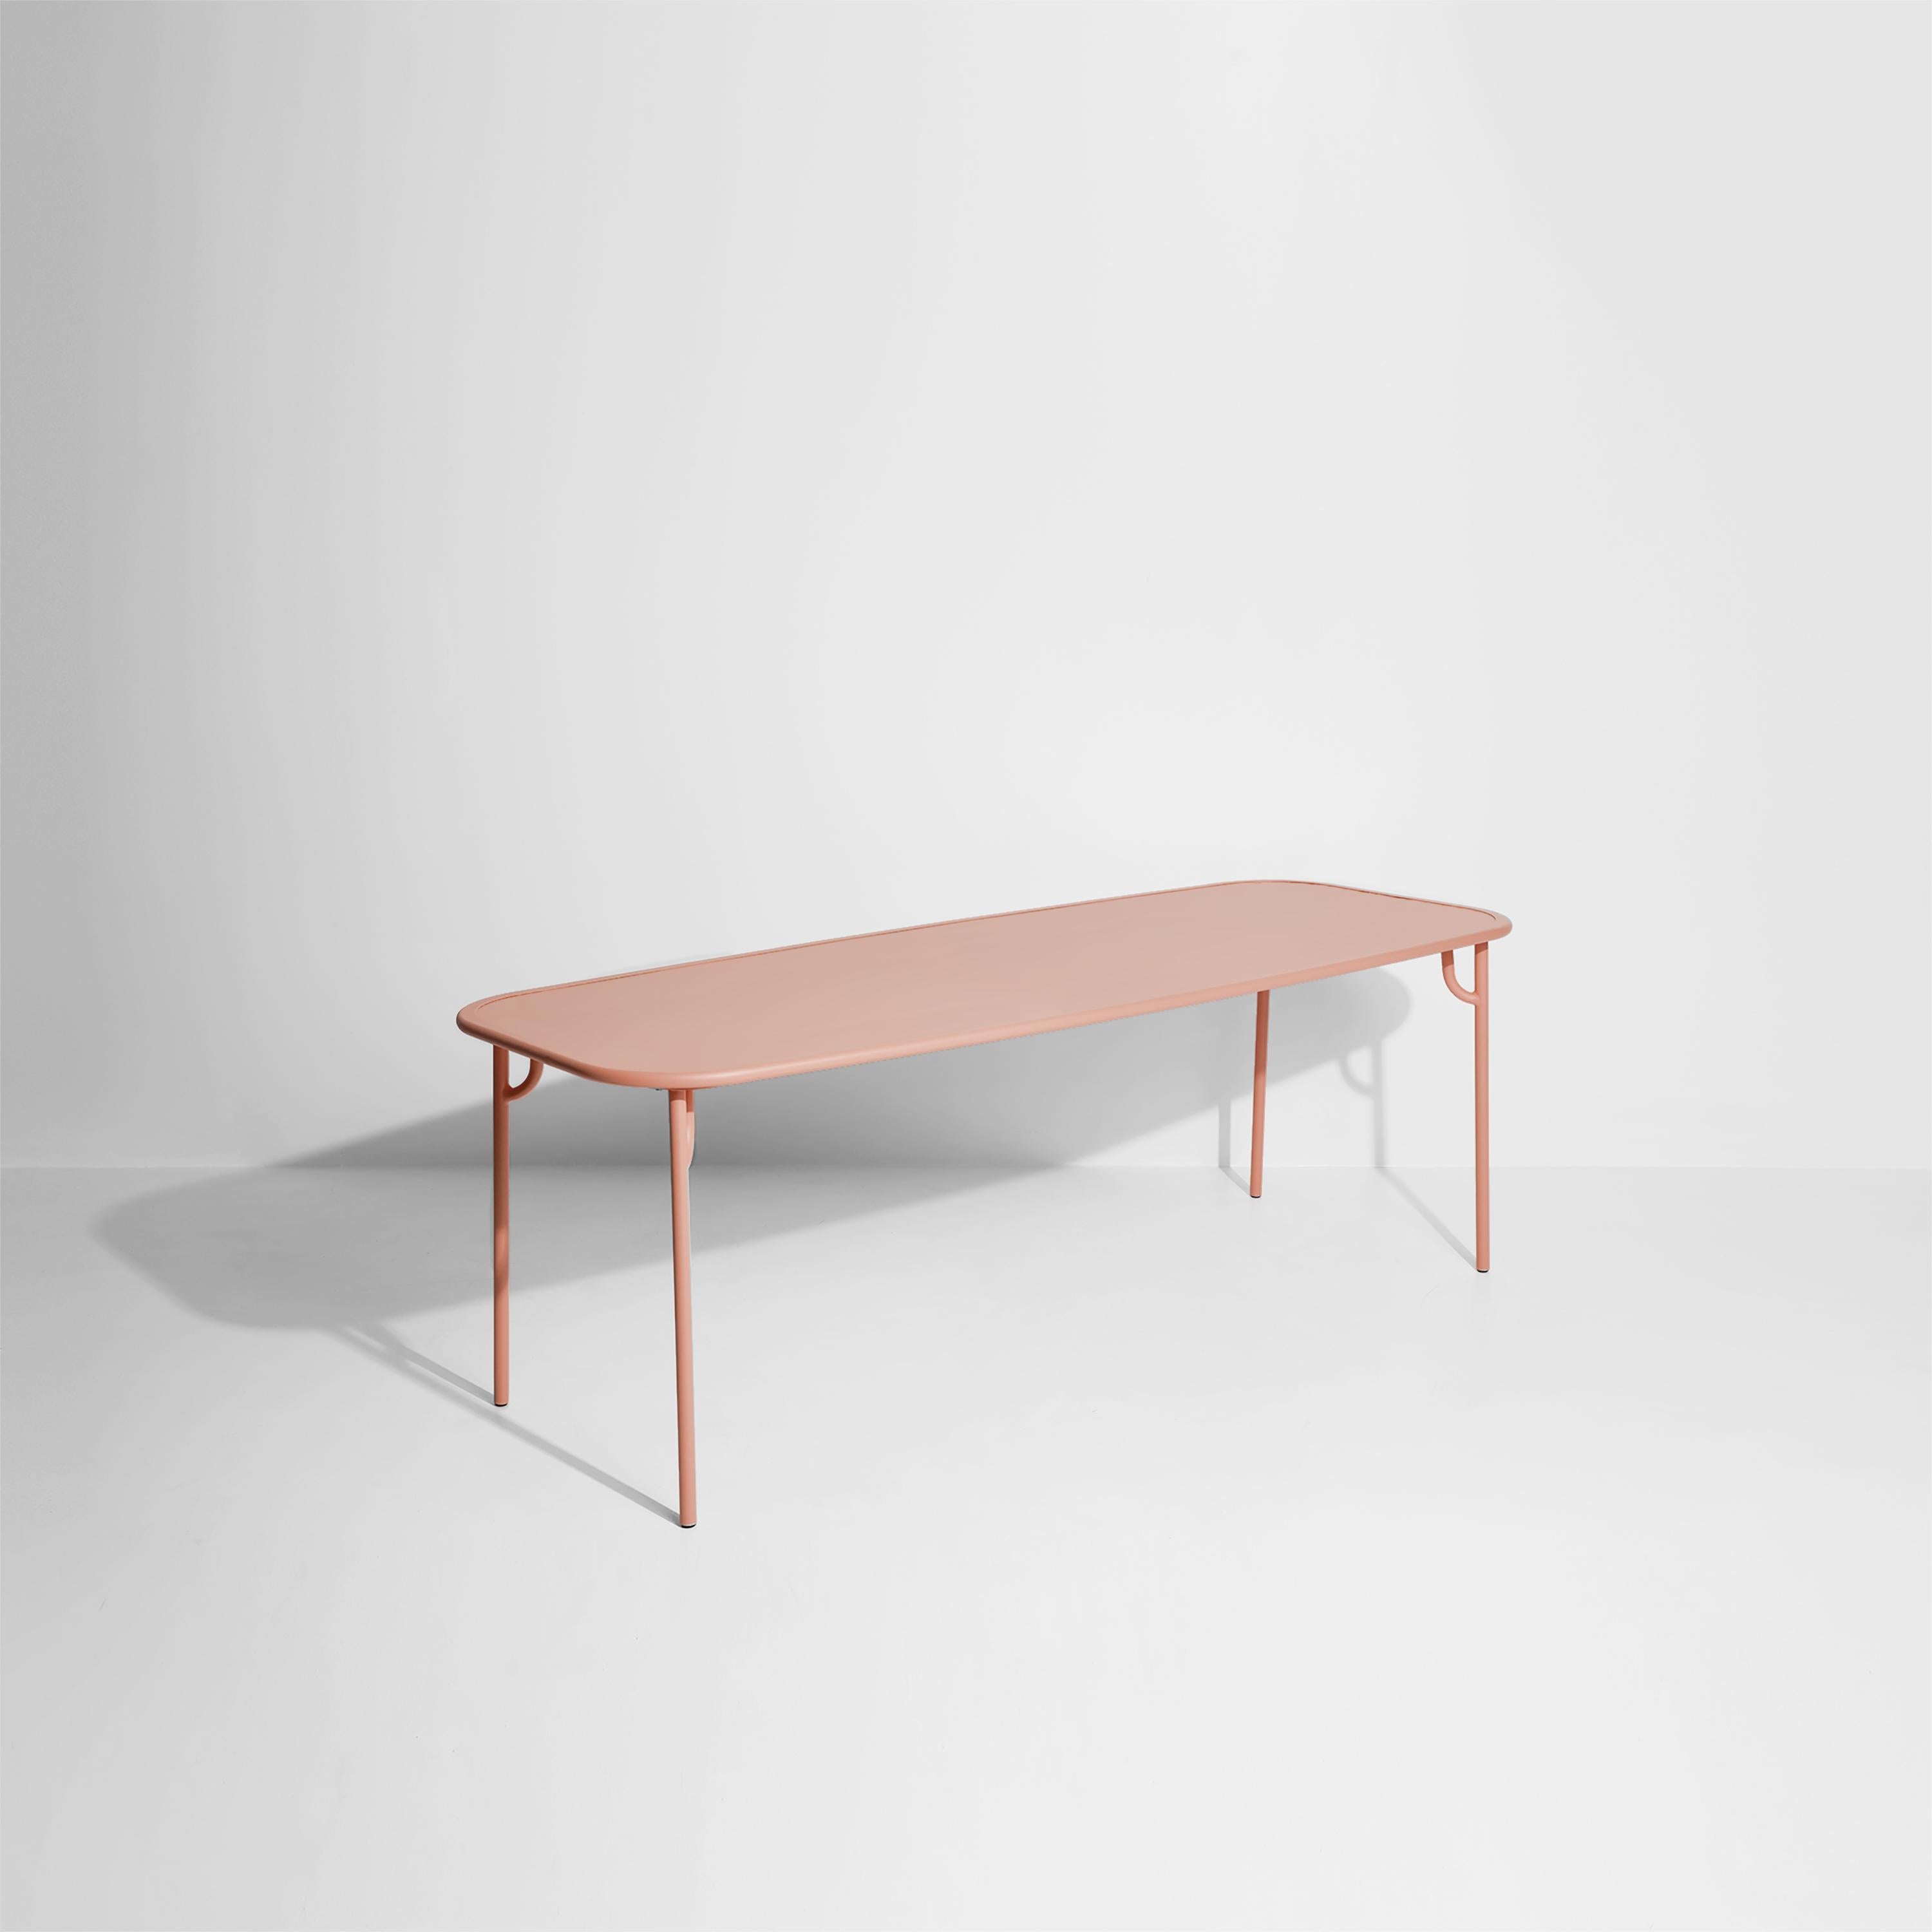 Petite Friture Week-End Large Plain Rectangular Dining Table in Blush Aluminium by Studio BrichetZiegler, 2017

The week-end collection is a full range of outdoor furniture, in aluminium grained epoxy paint, matt finish, that includes 18 functions